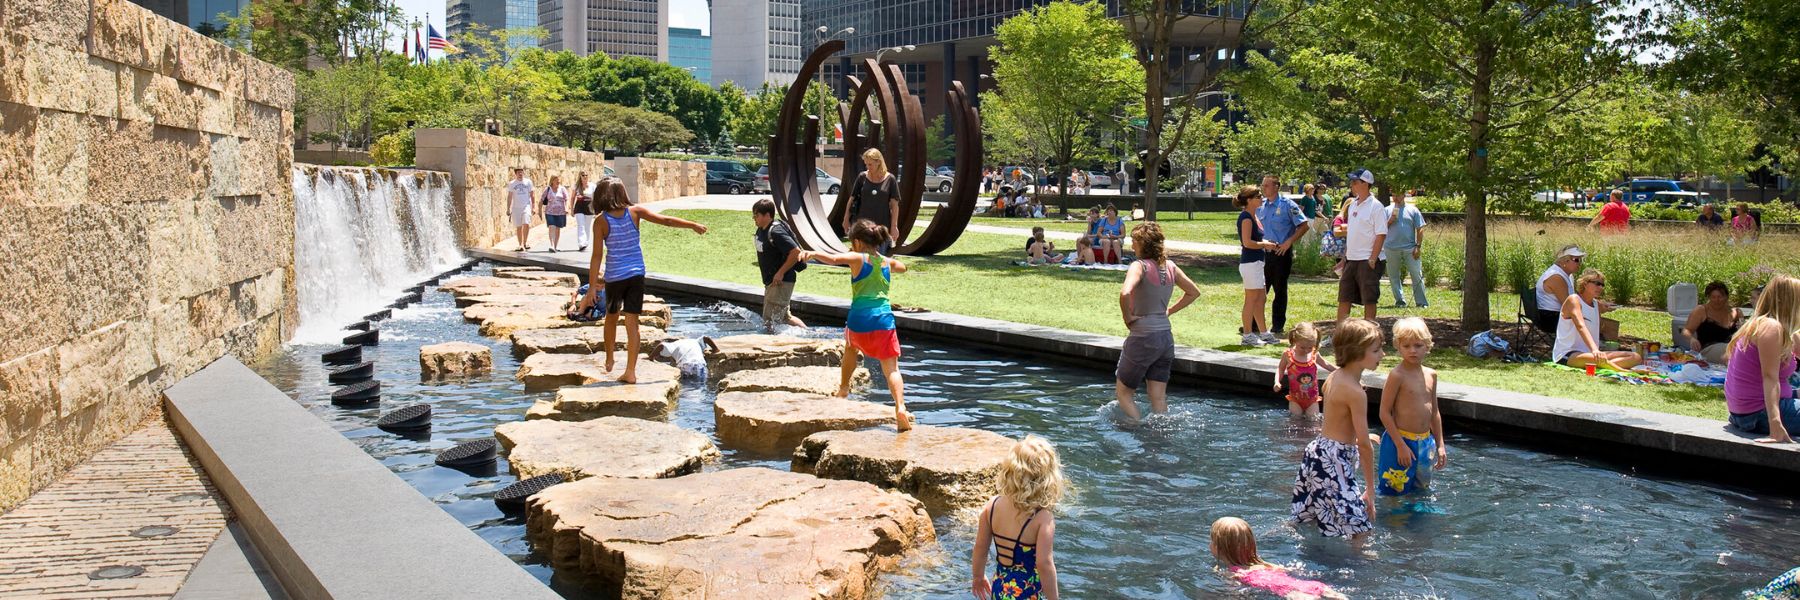 Families play in the water features at Citygarden to keep cool in St. Louis.